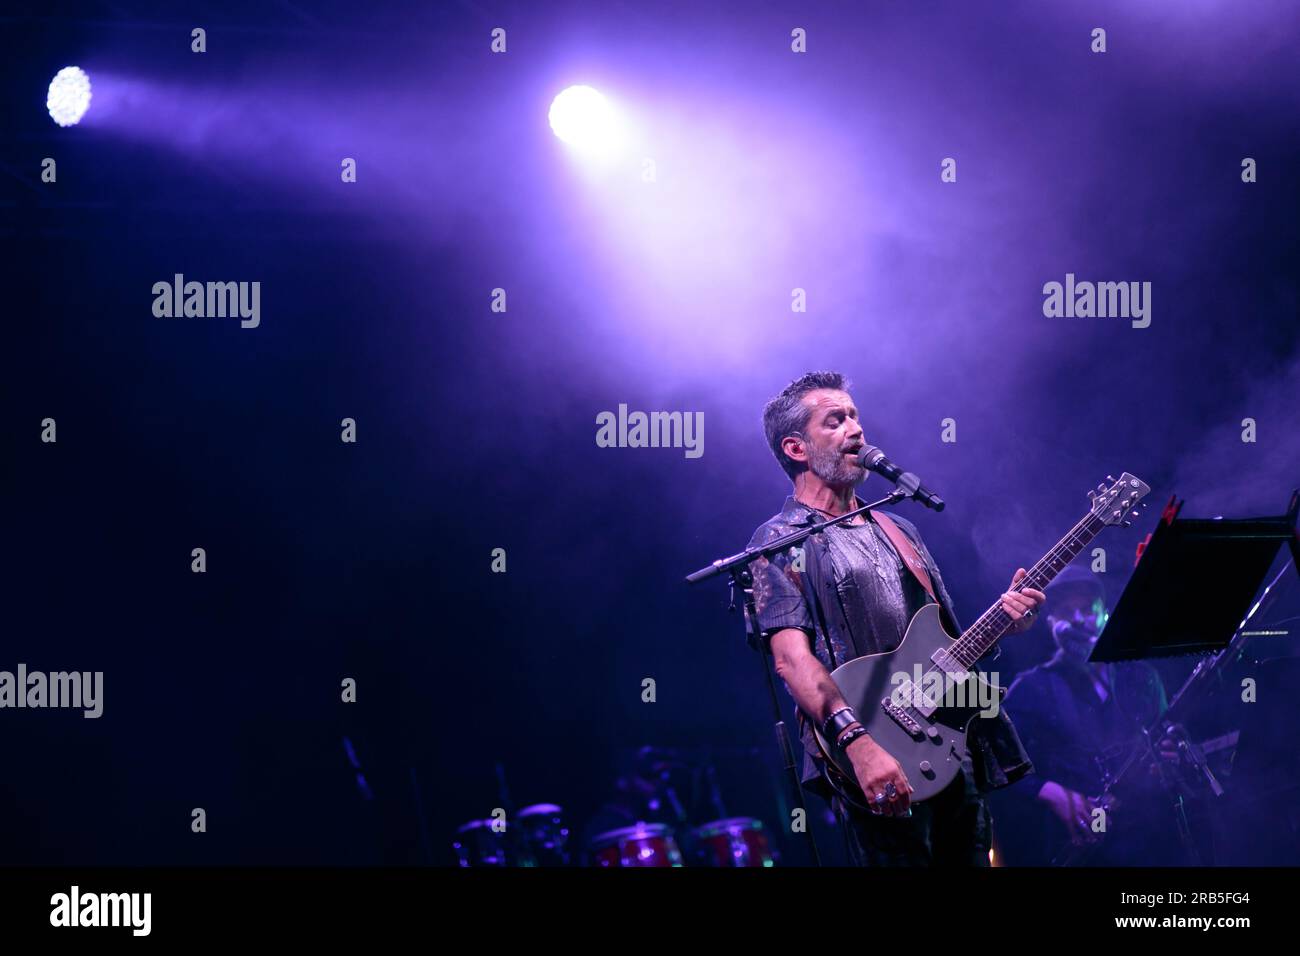 the italian songwriter Daniele Silvestri performs live with the band during the flowers festival in Turin, Italy Stock Photo